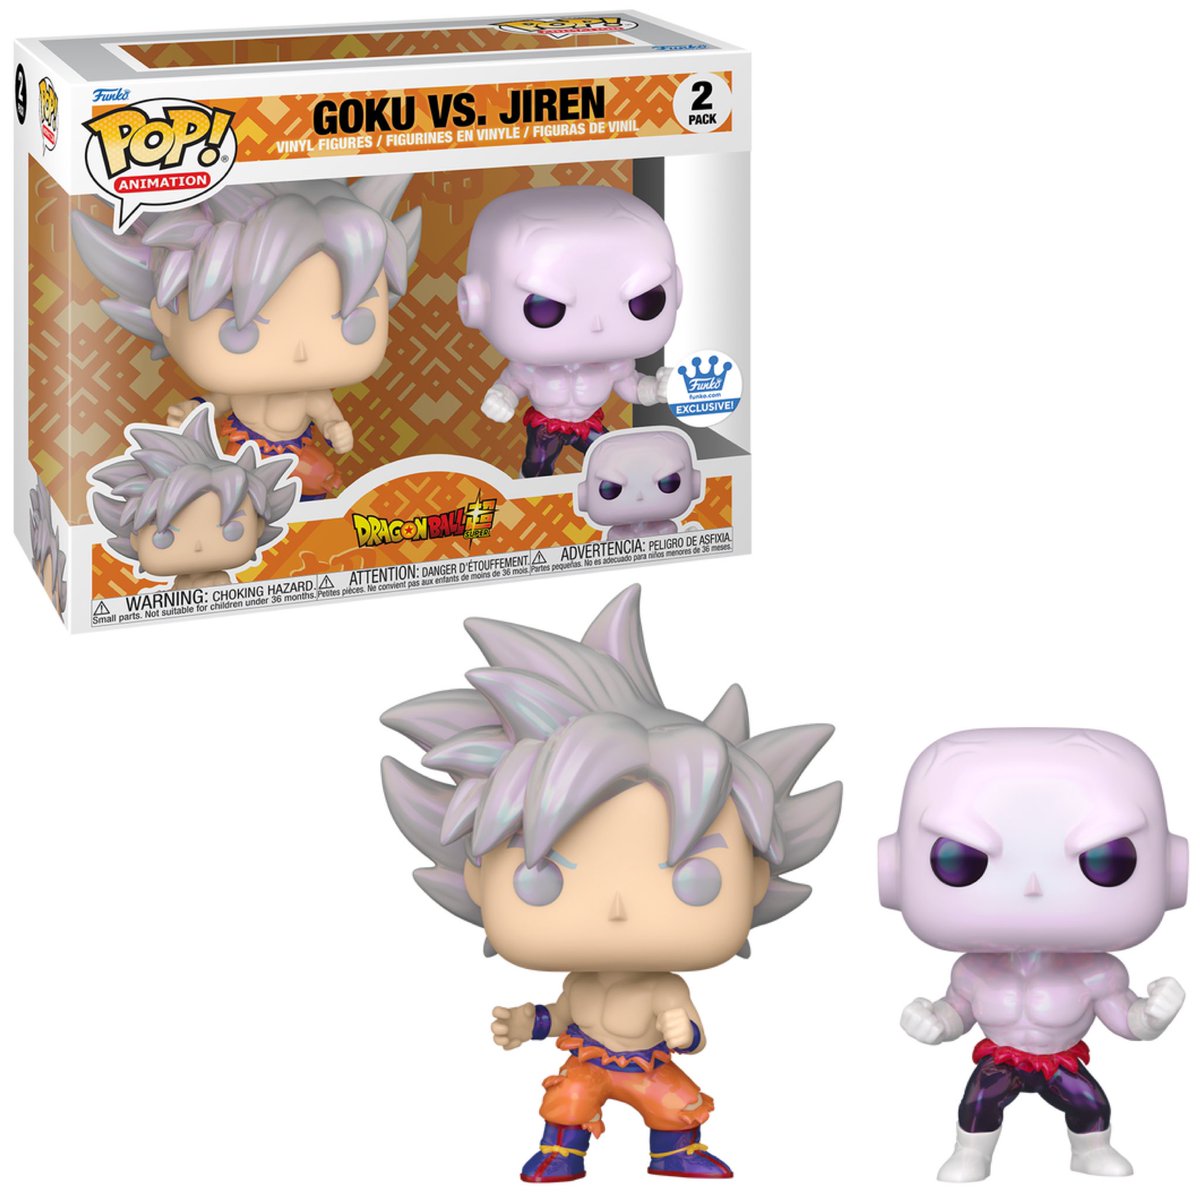 Funko exclusive Goku vs Jiren 2-pack is available now! #Ad #DBS . distracker.info/3R15eMb . #DragonBallSuper #Goku #Jiren #Funko #FunkoPop #FunkoPopVinyl #Pop #PopVinyl #Collectibles #Collectible #FunkoCollector #FunkoPops #Collector #Toy #Toys #DisTrackers